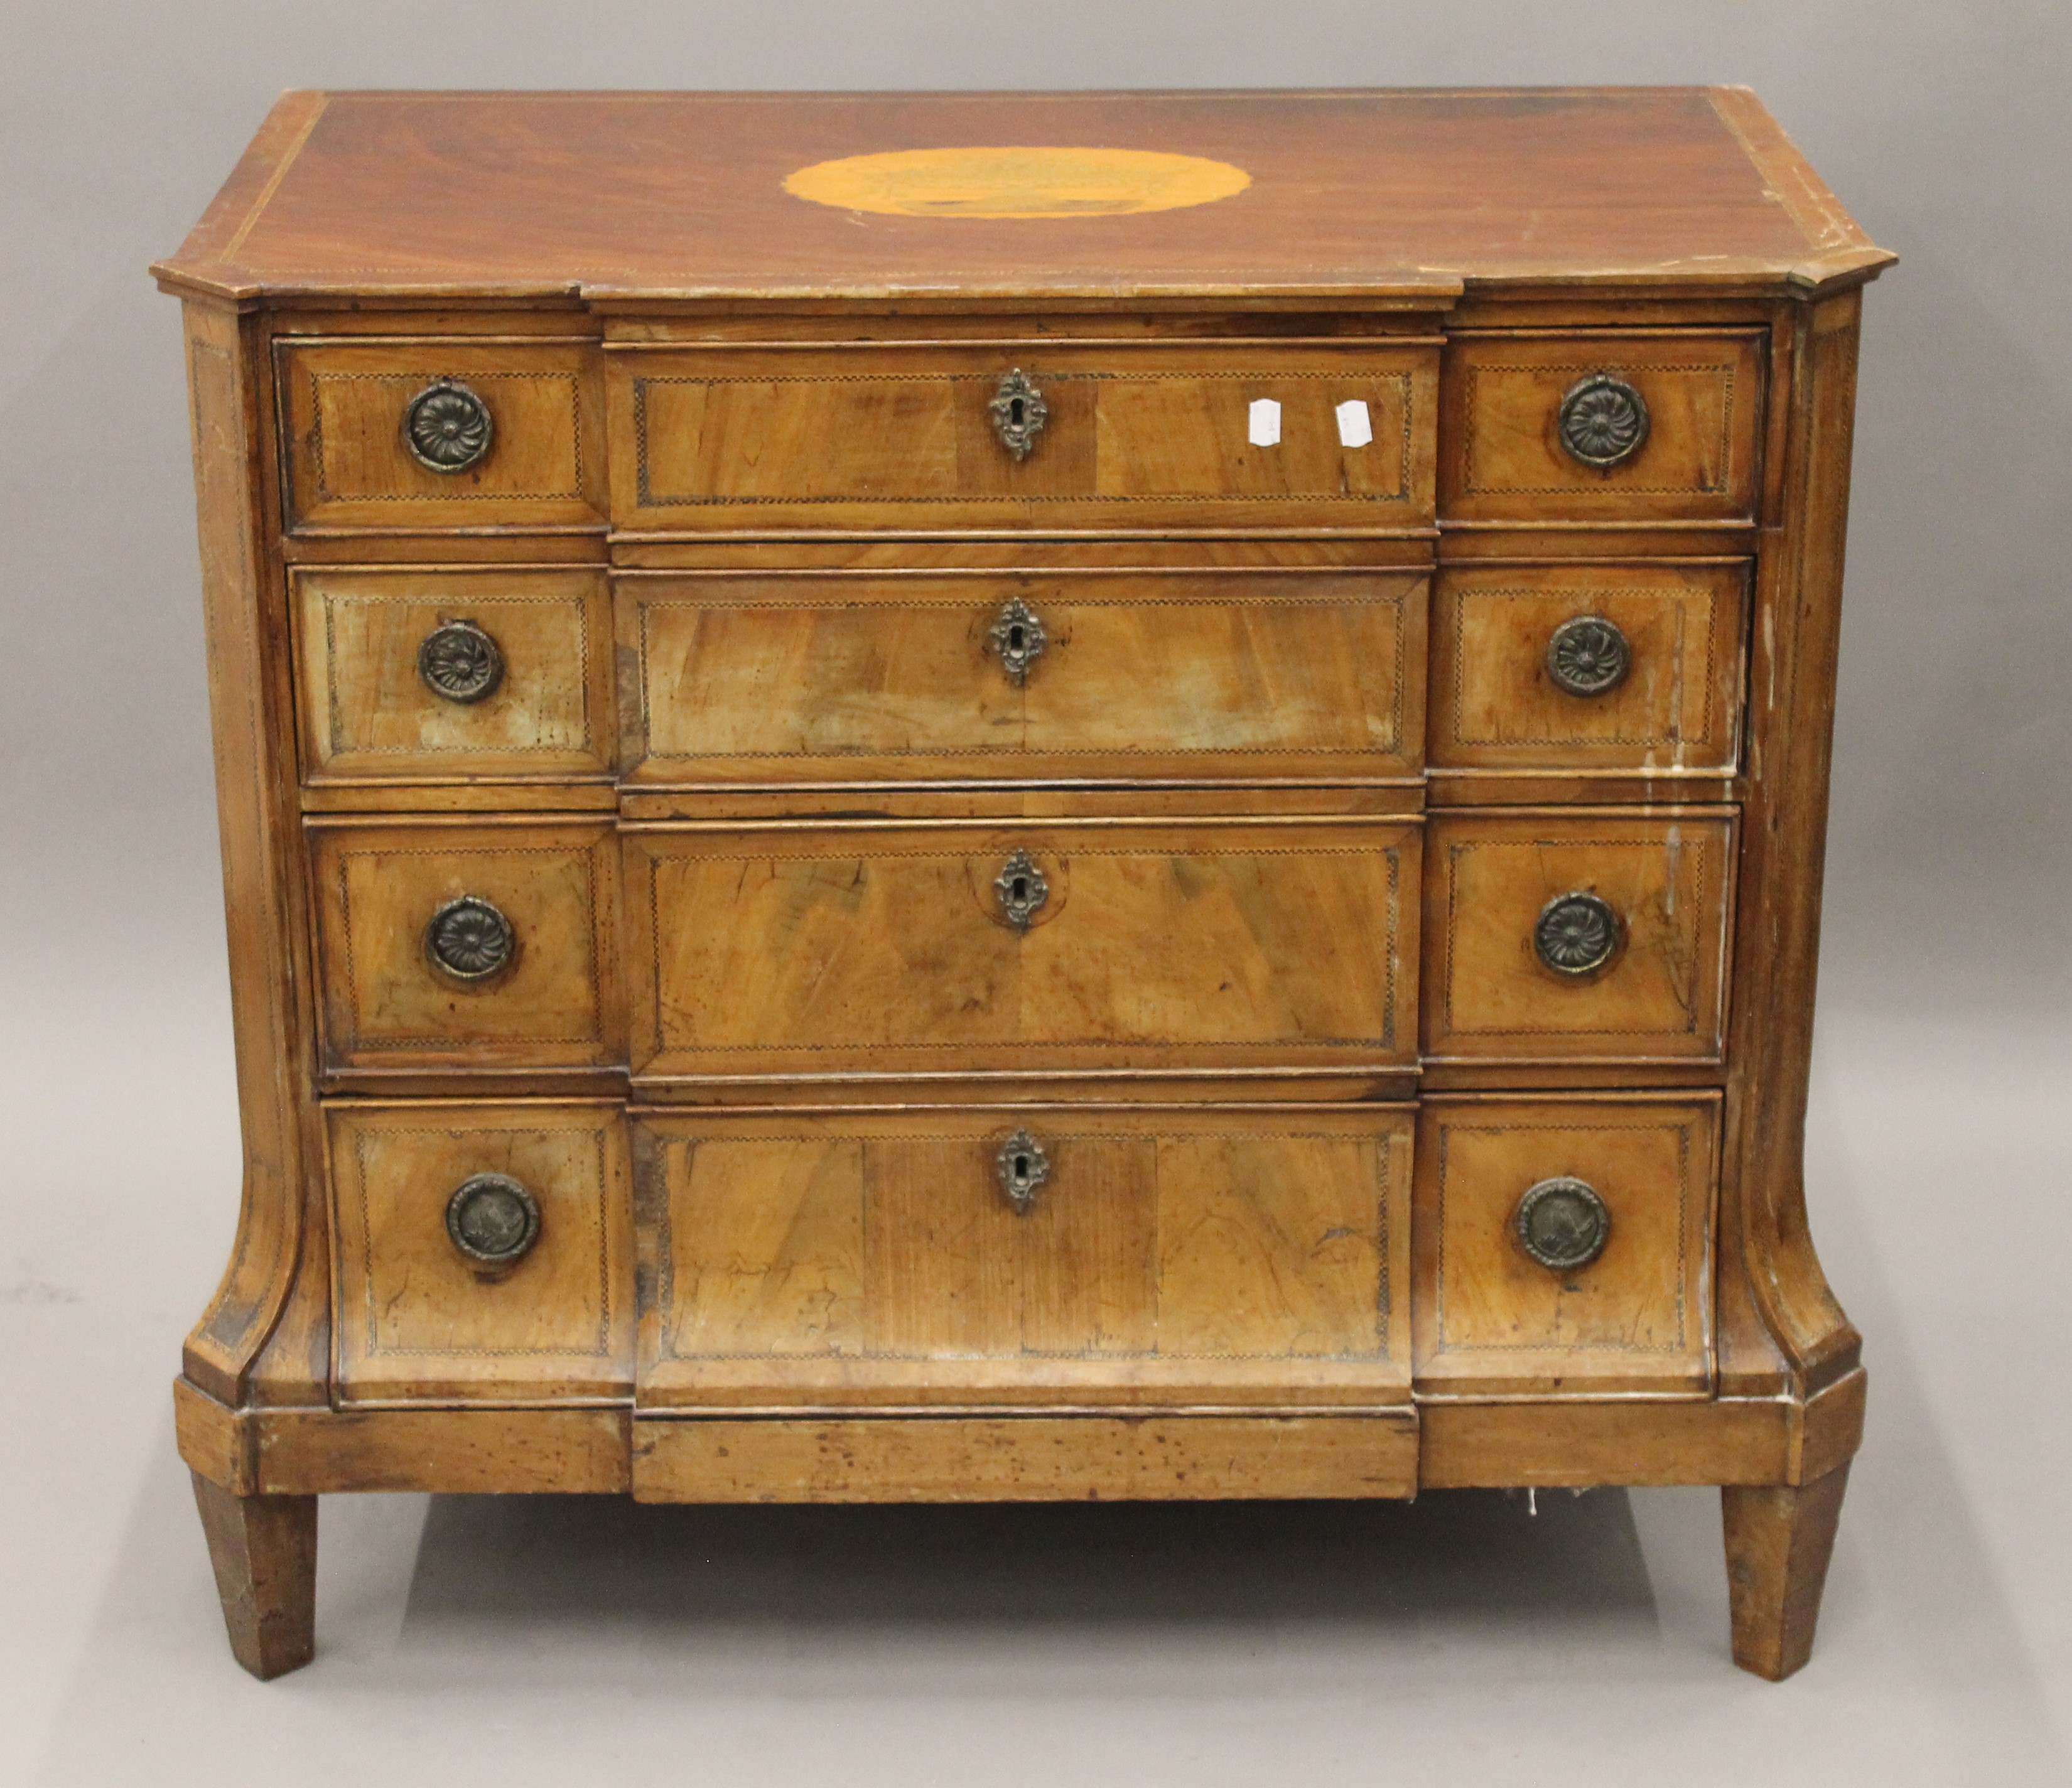 A 19th century inlaid mahogany breakfront chest of drawers. 96.5 cm wide.